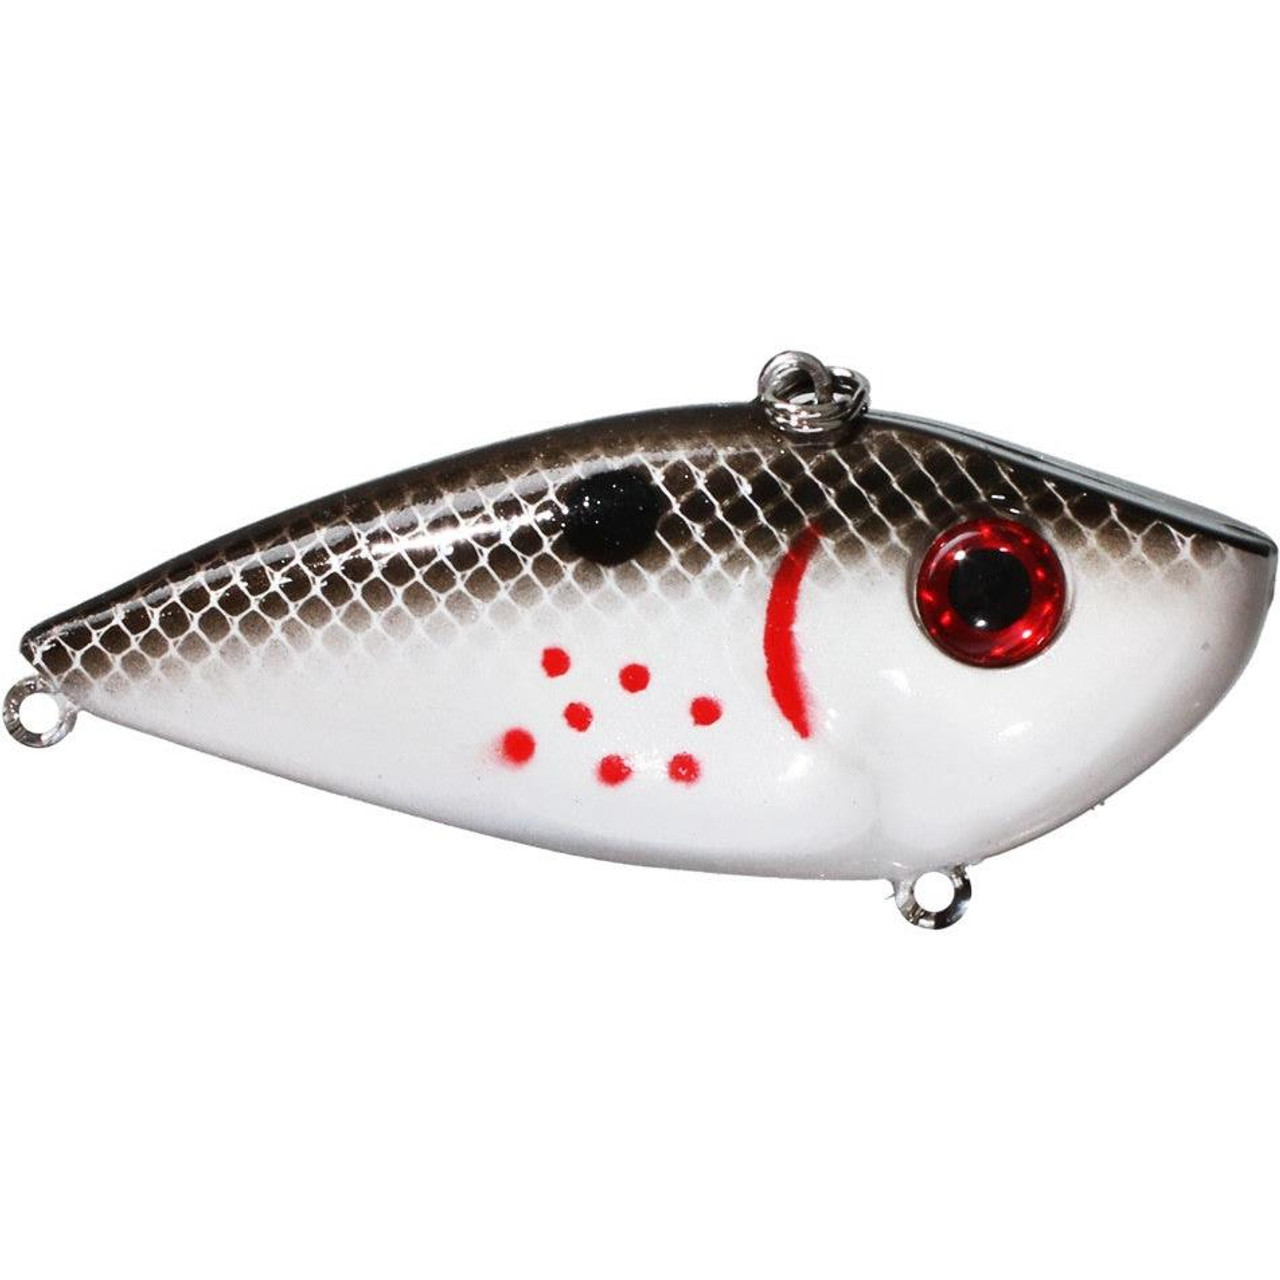 https://cdn11.bigcommerce.com/s-70mih4s/images/stencil/1280x1280/products/6535/53301/Strike-King-Red-Eye-Shad-Crankbait-051034188615_image1__43773.1620163768.jpg?c=2